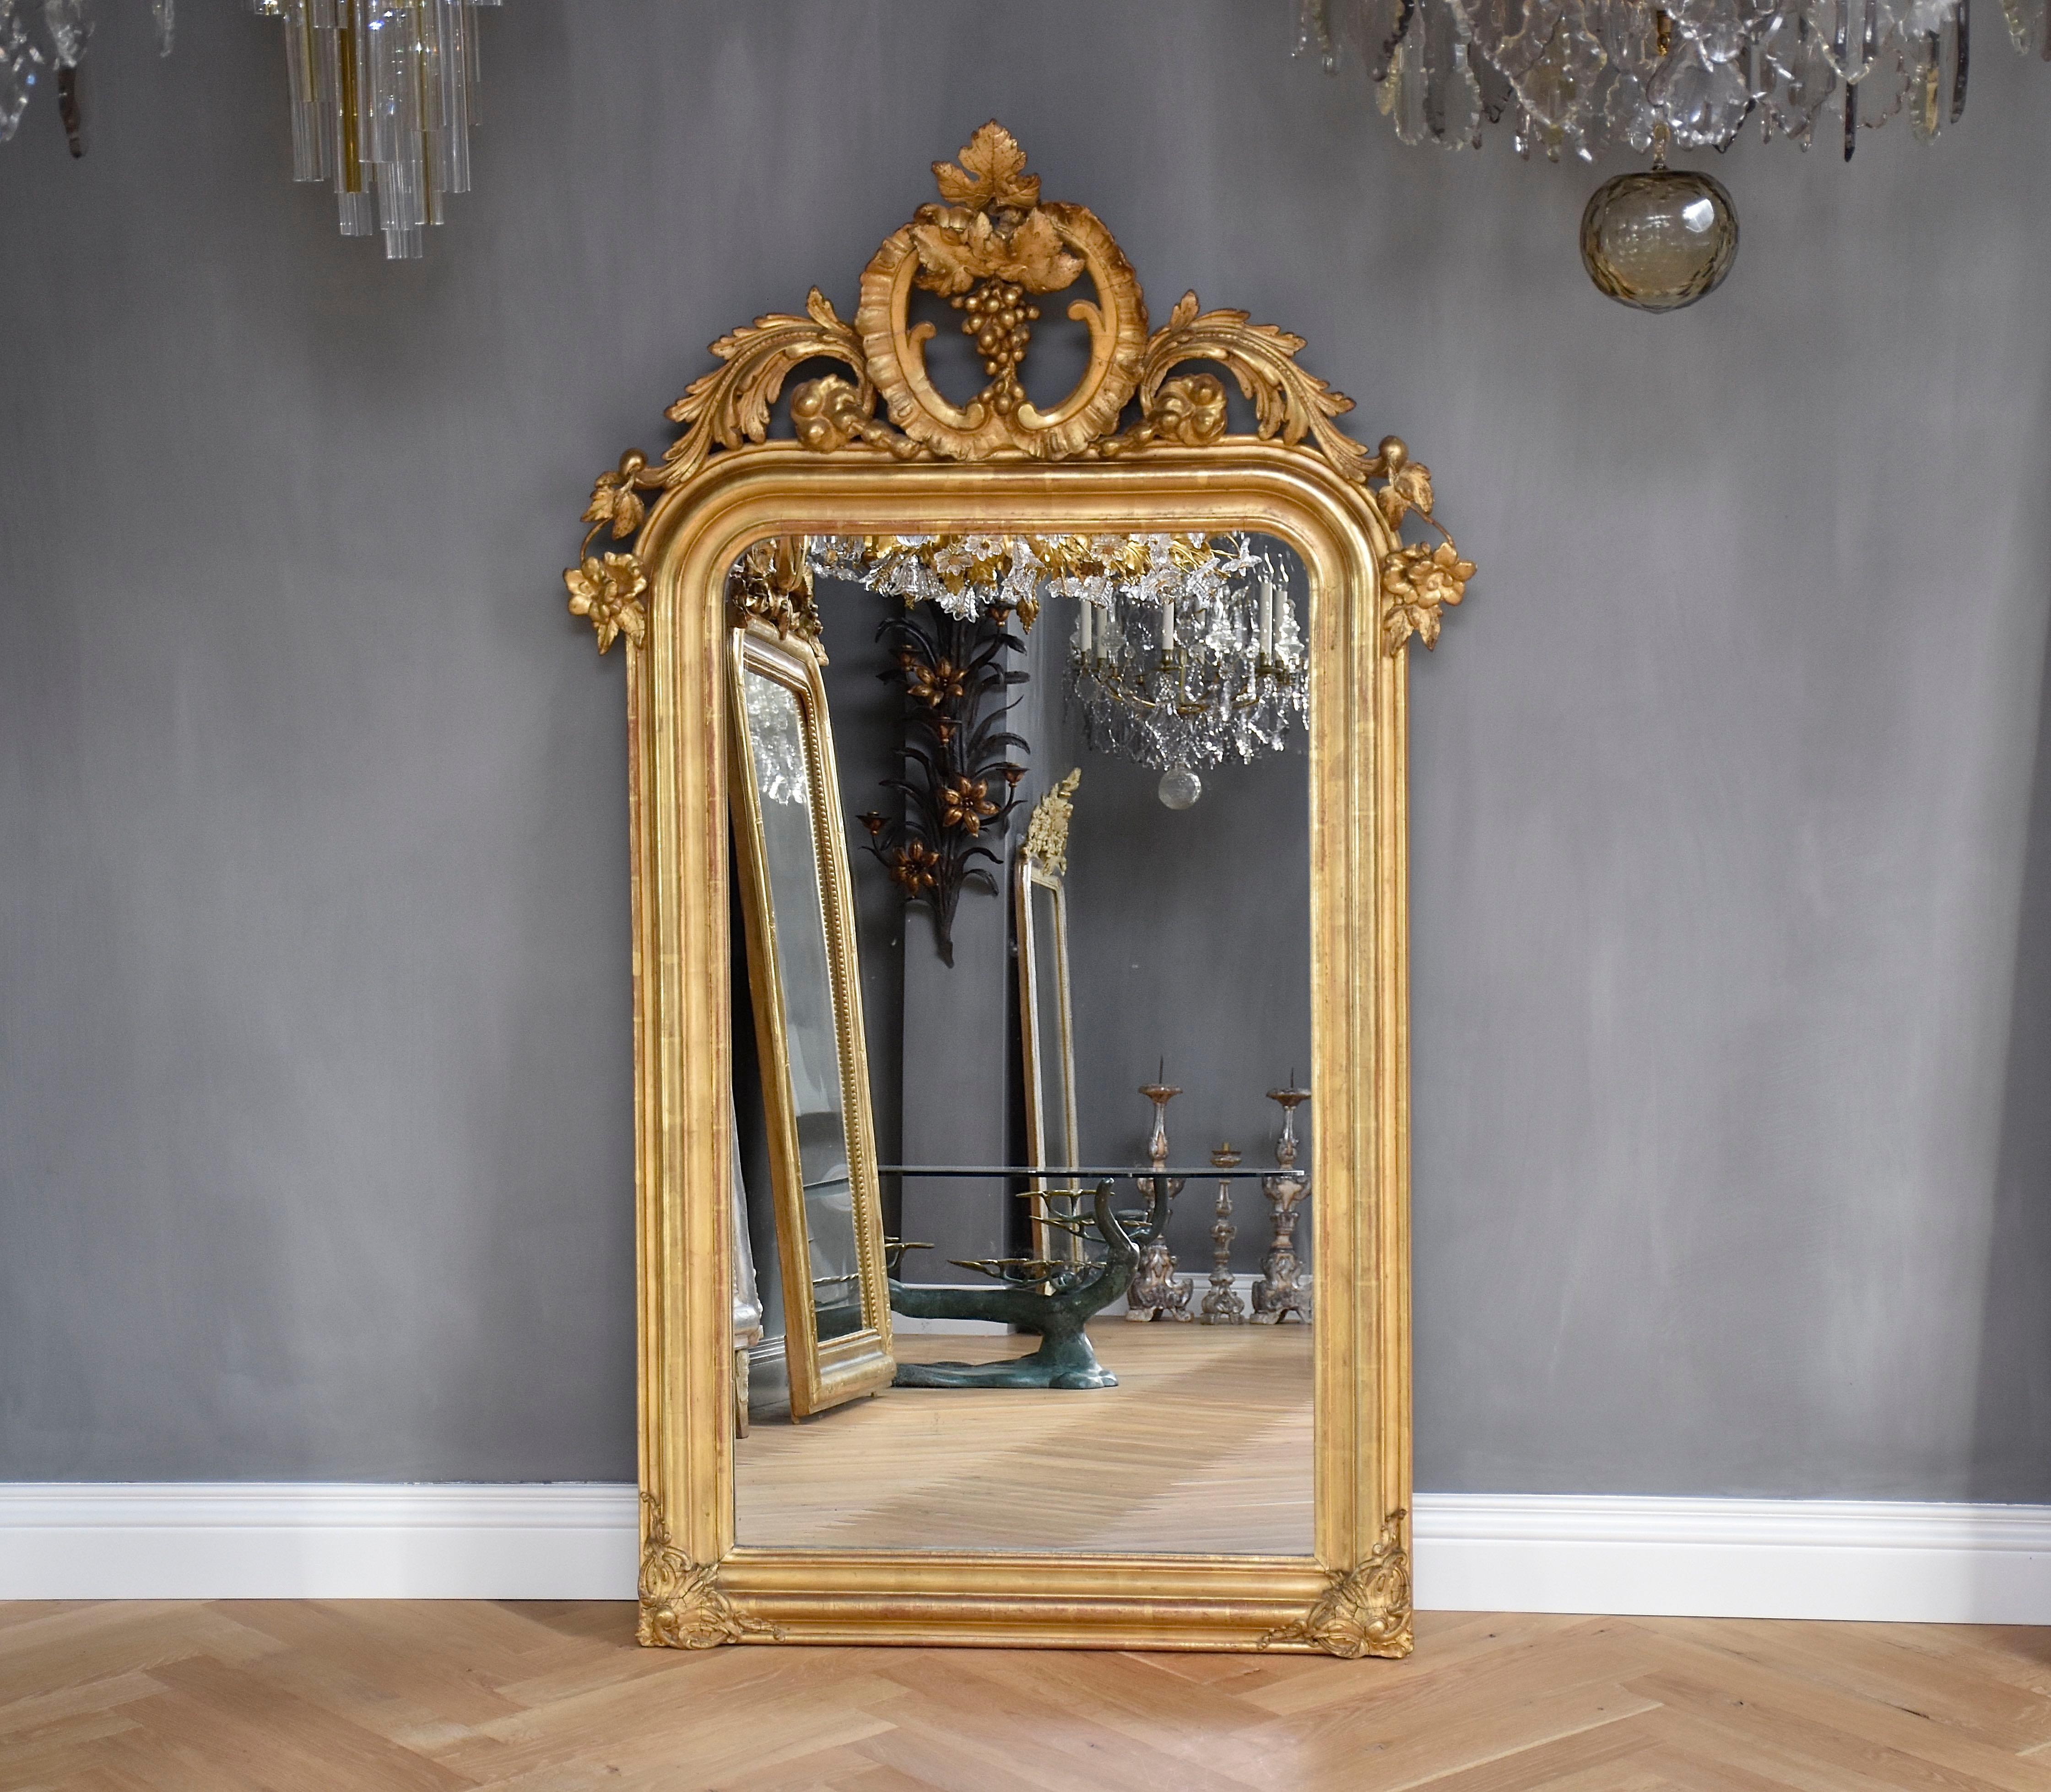 A wonderful 19th century gilded French mirror with its original slightly foxed antique glass and a beautiful crown.
The crown is decorated with flowers, leaves, C-scrolls and bunches of grapes.
The corners with pretty ornaments.
The frame has an